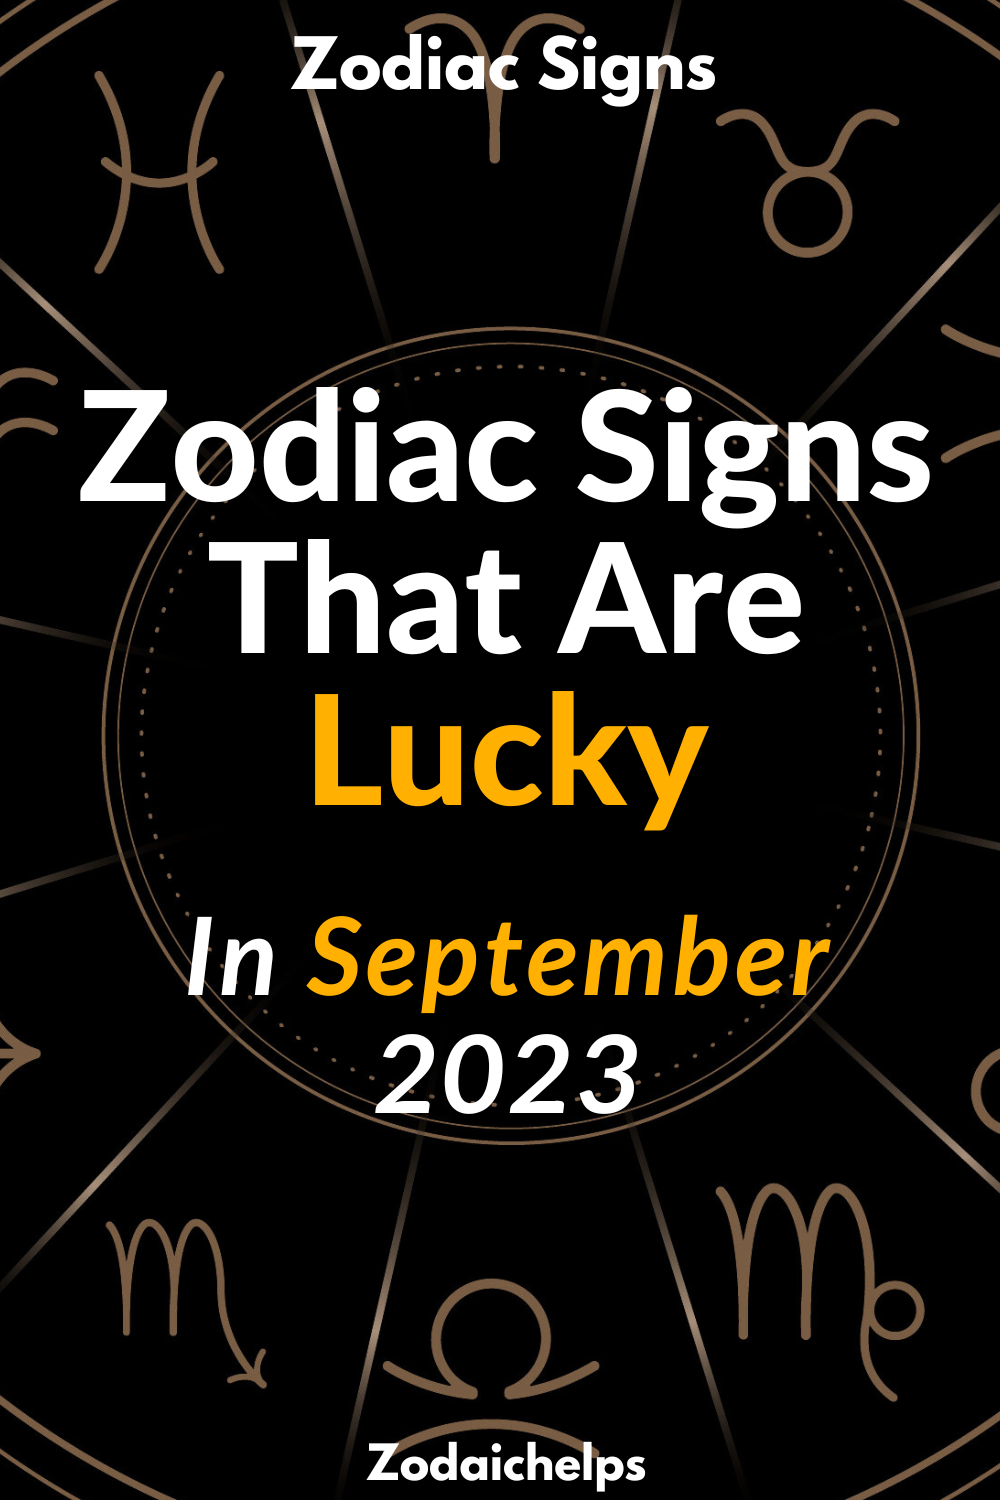 Zodiac Signs That Are Lucky In September 2023